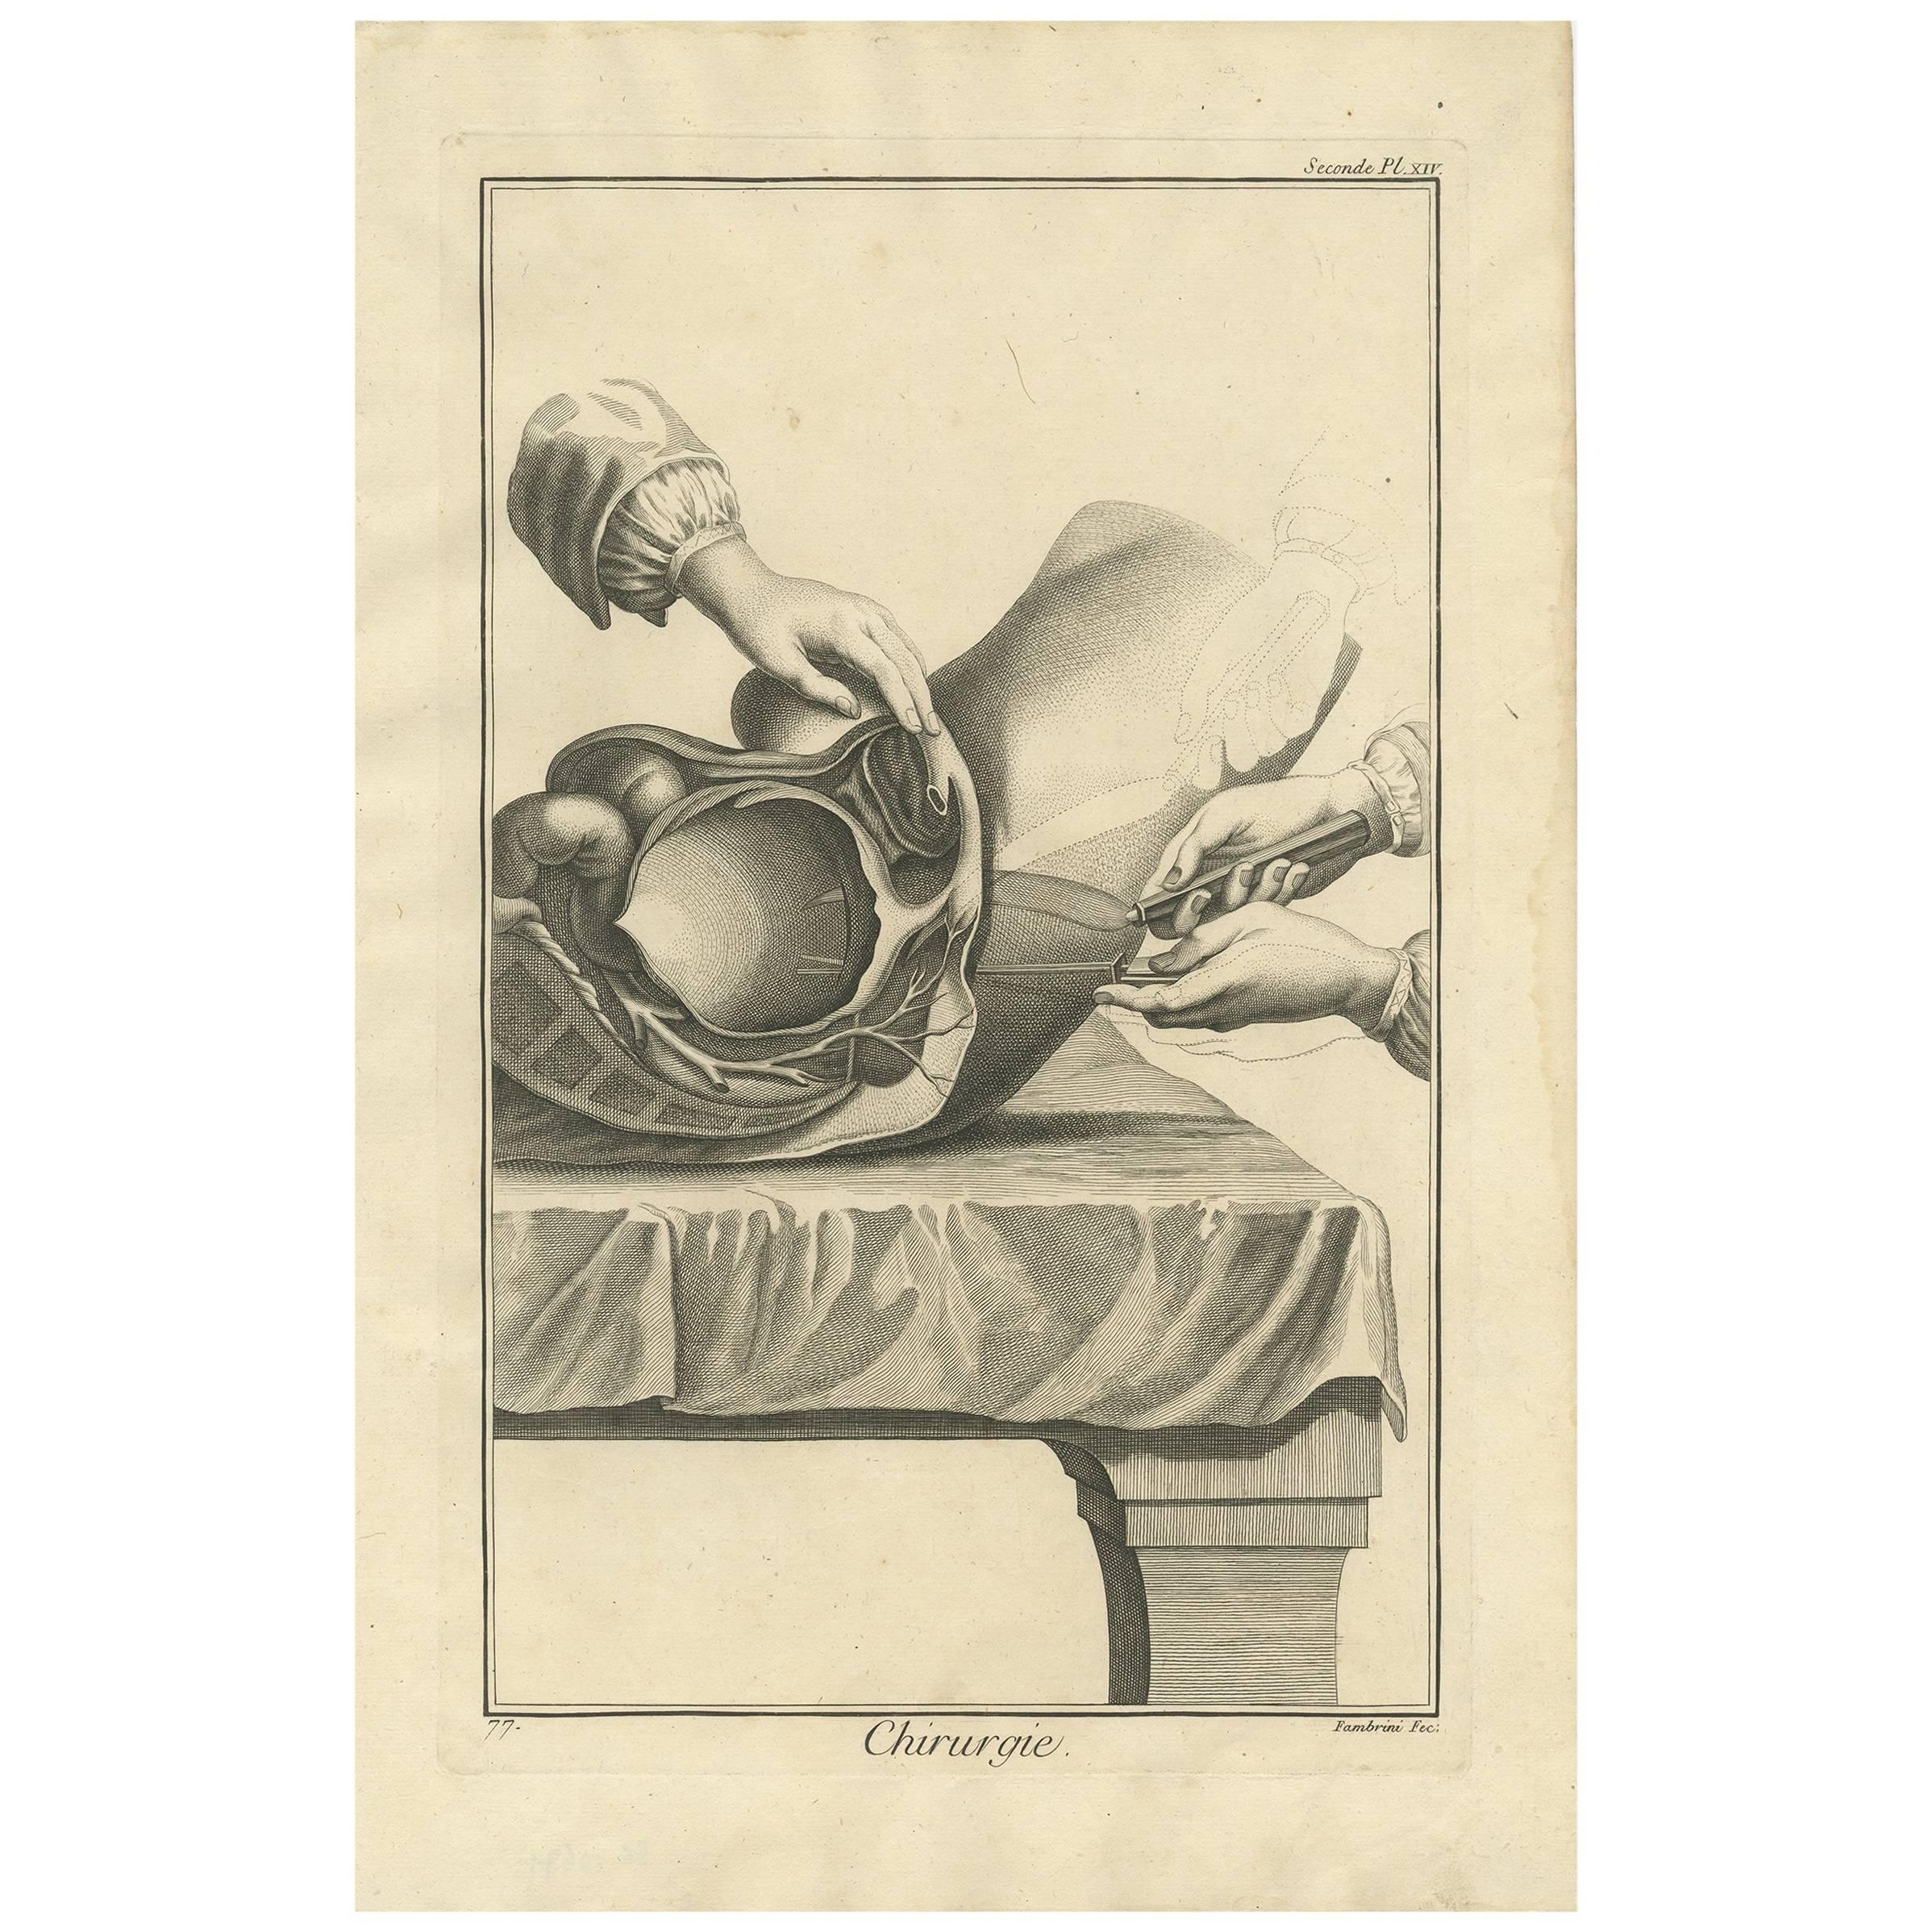 Antique Medical Print 'Seconde Pl. XIV' by D. Diderot, circa 1760 For Sale